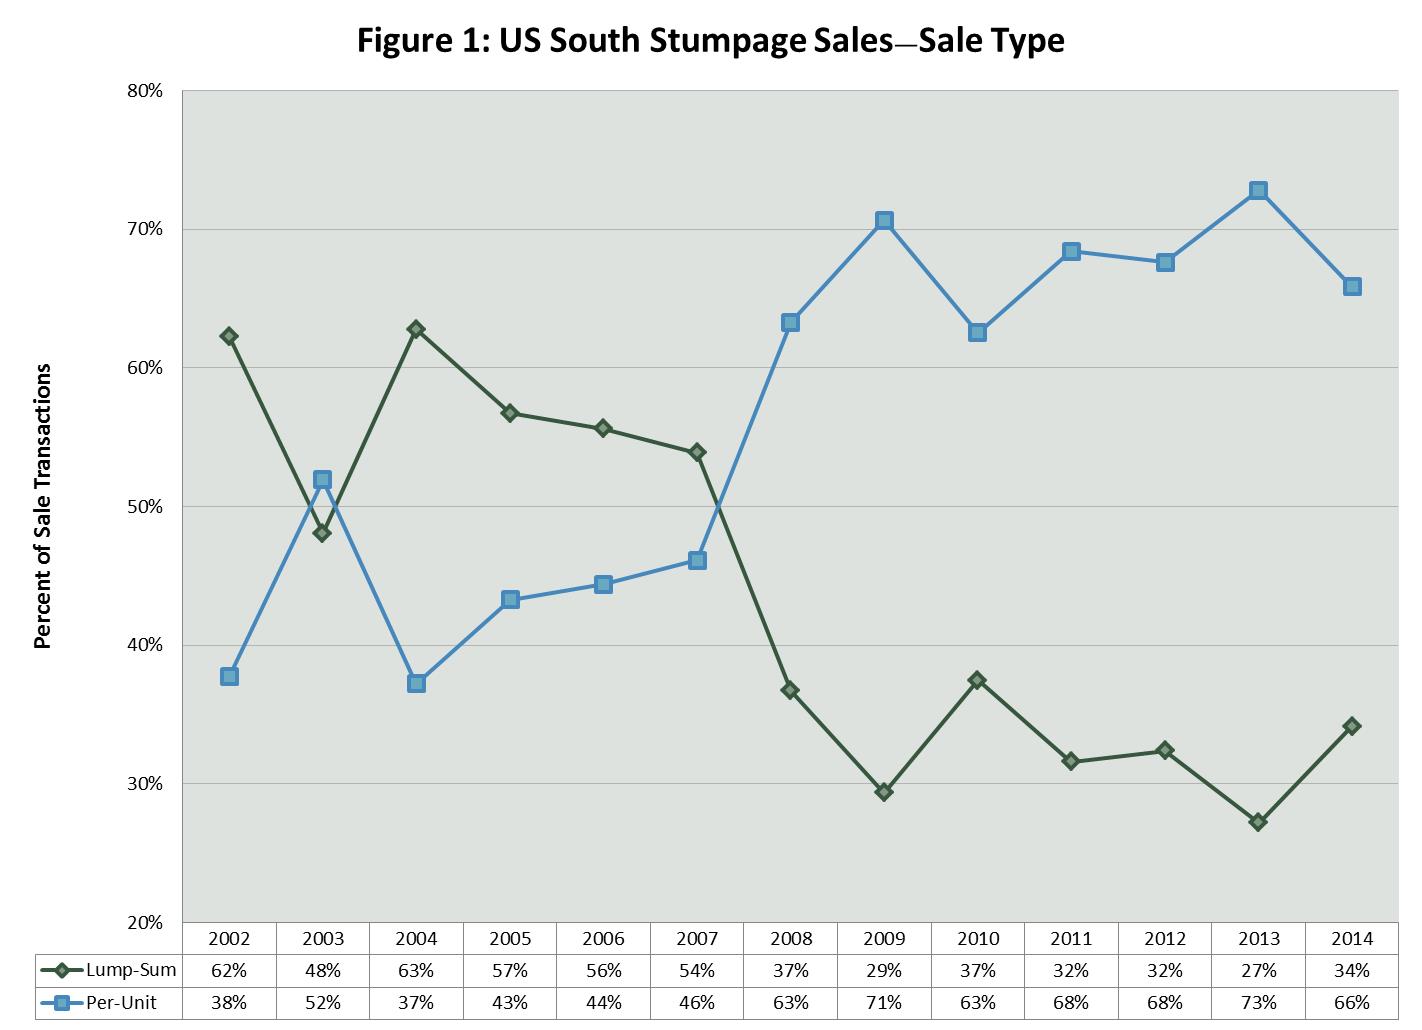 Stumpage Market Trends in the US South: Sale and Buyer Types